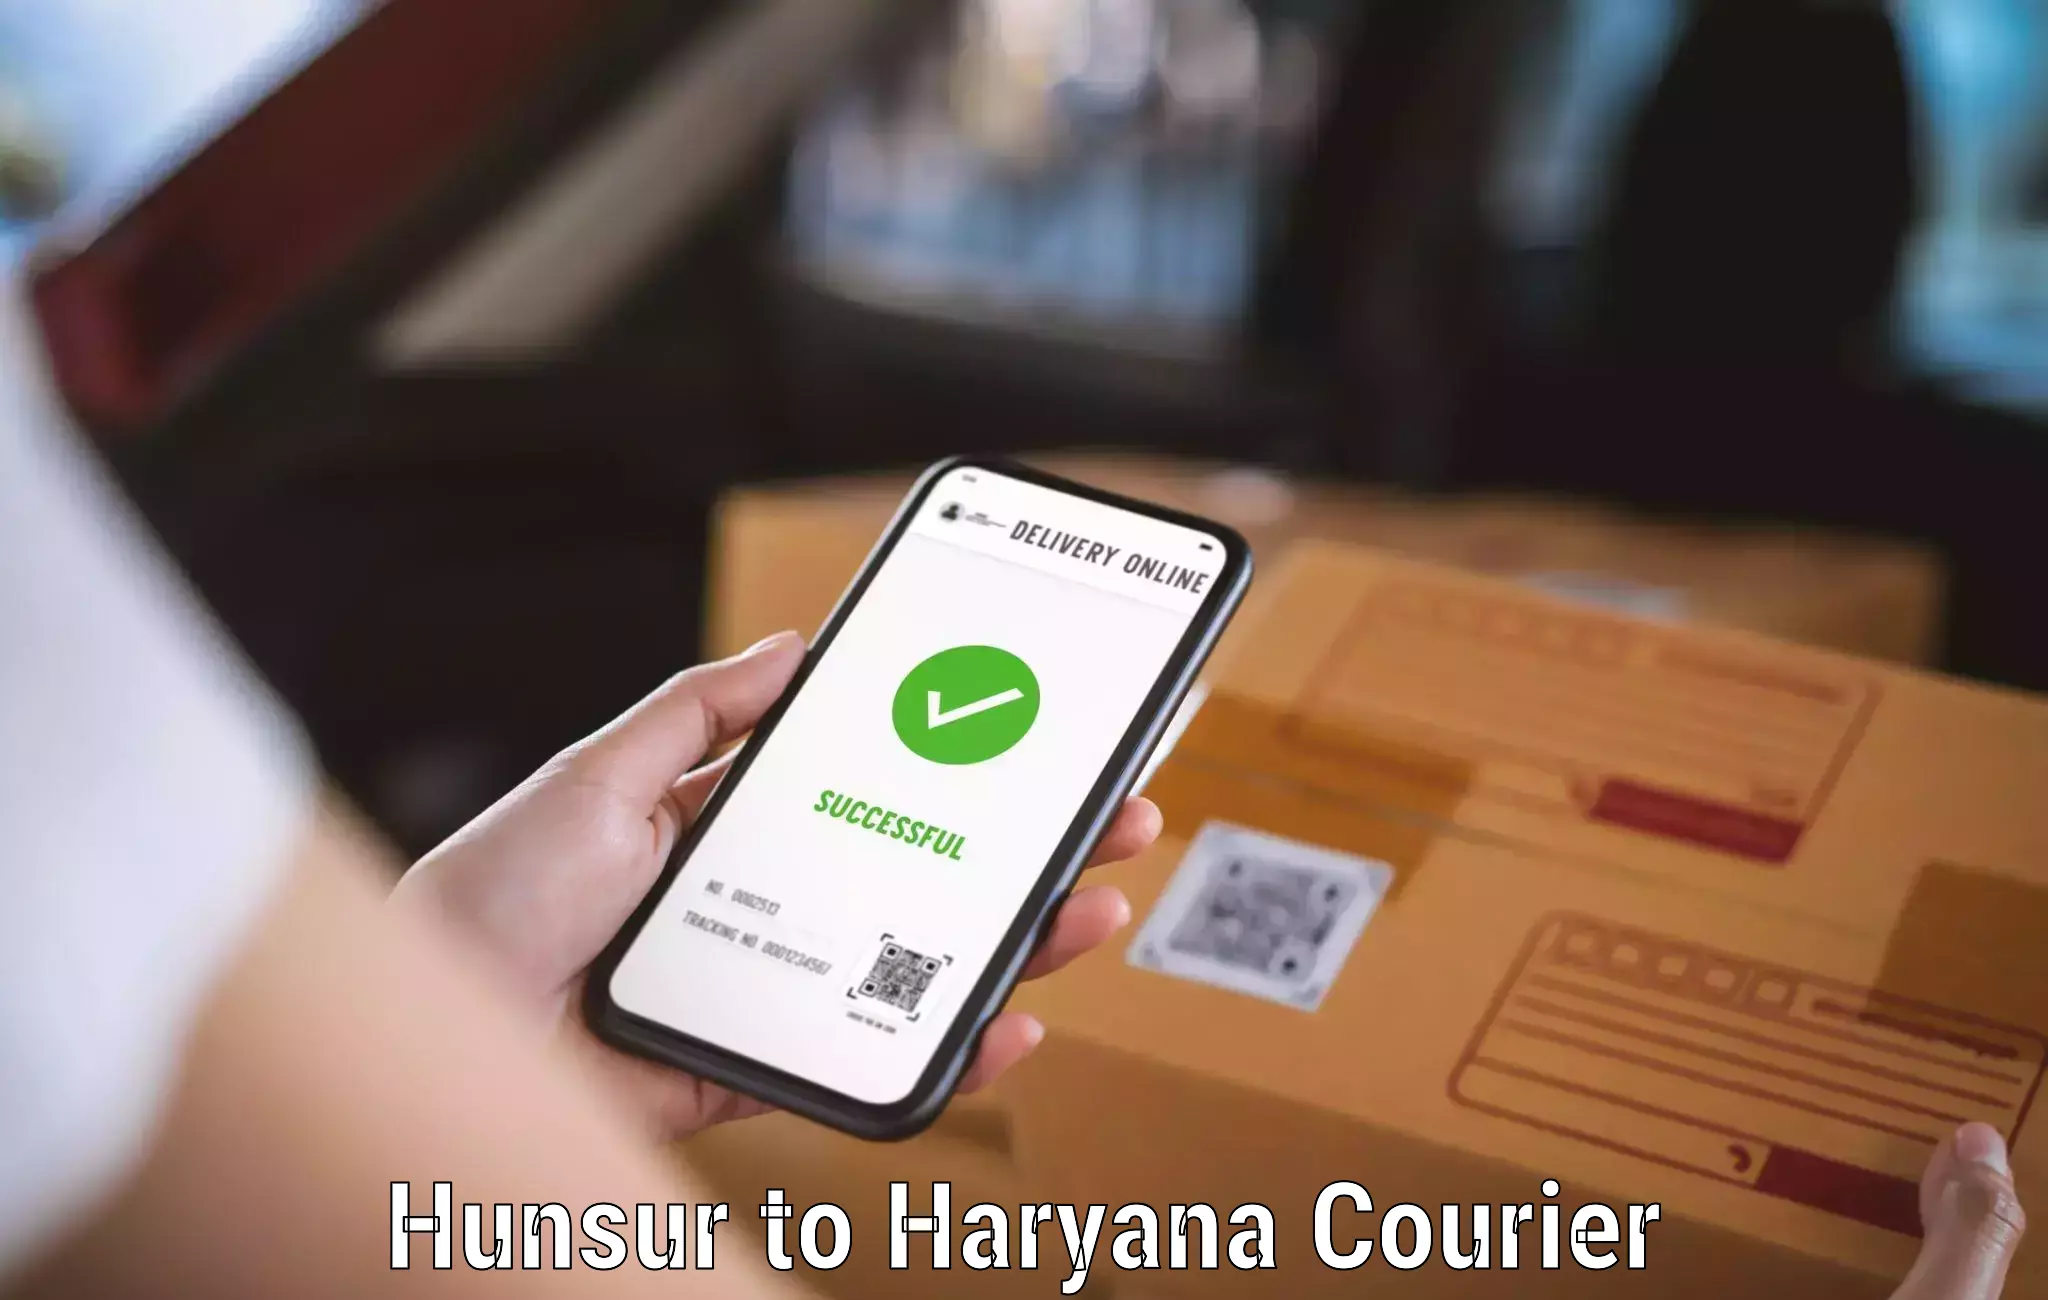 Nationwide courier service Hunsur to NCR Haryana